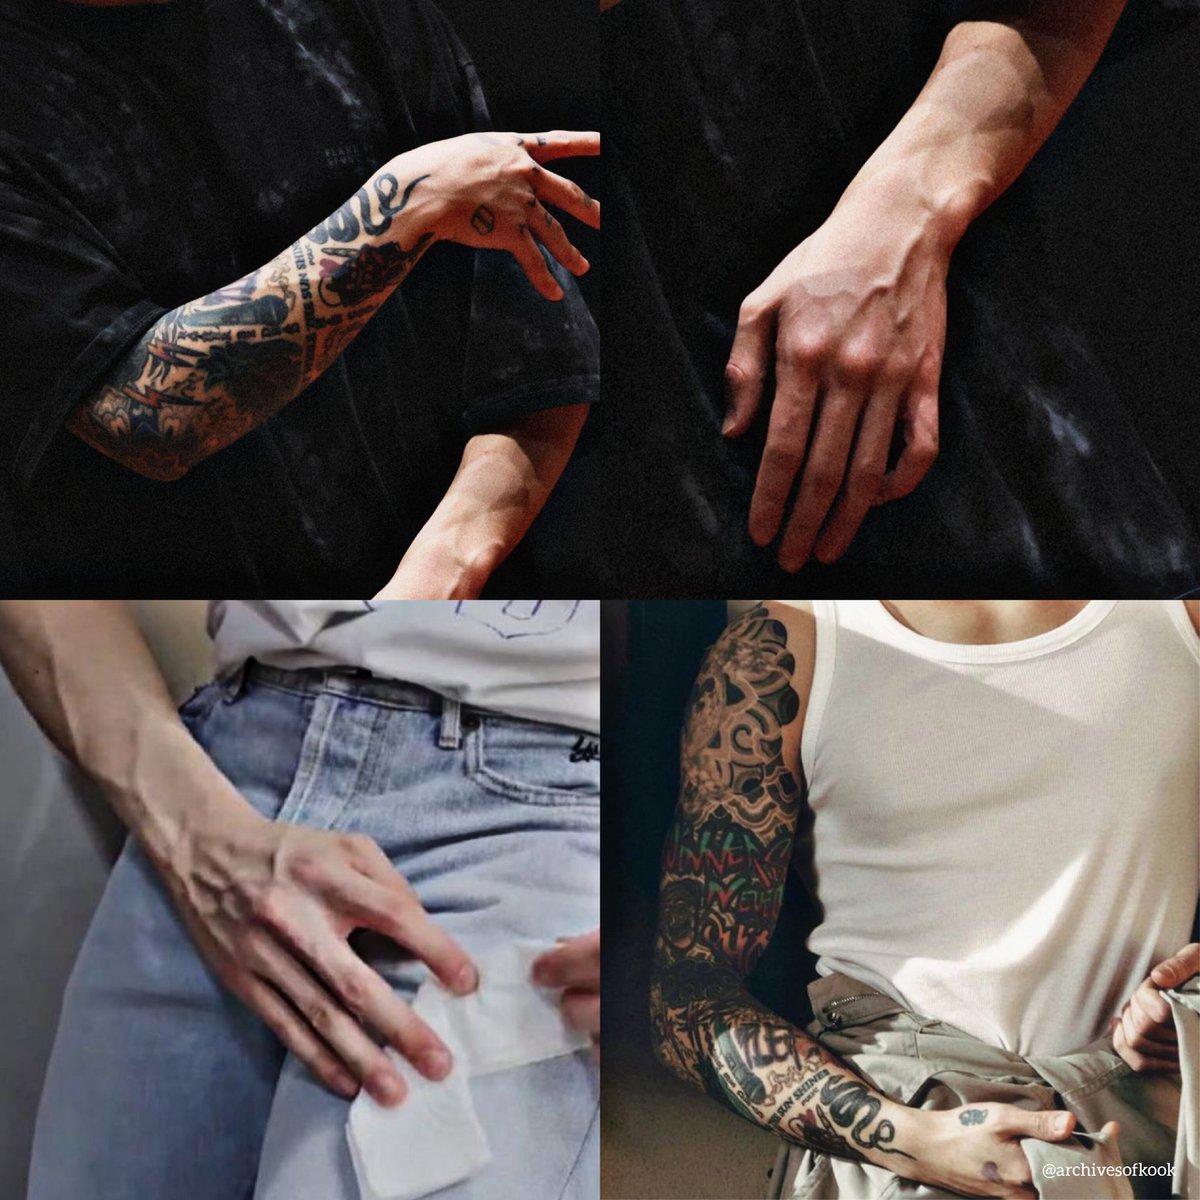 jungkook's veiny hands and tattoos